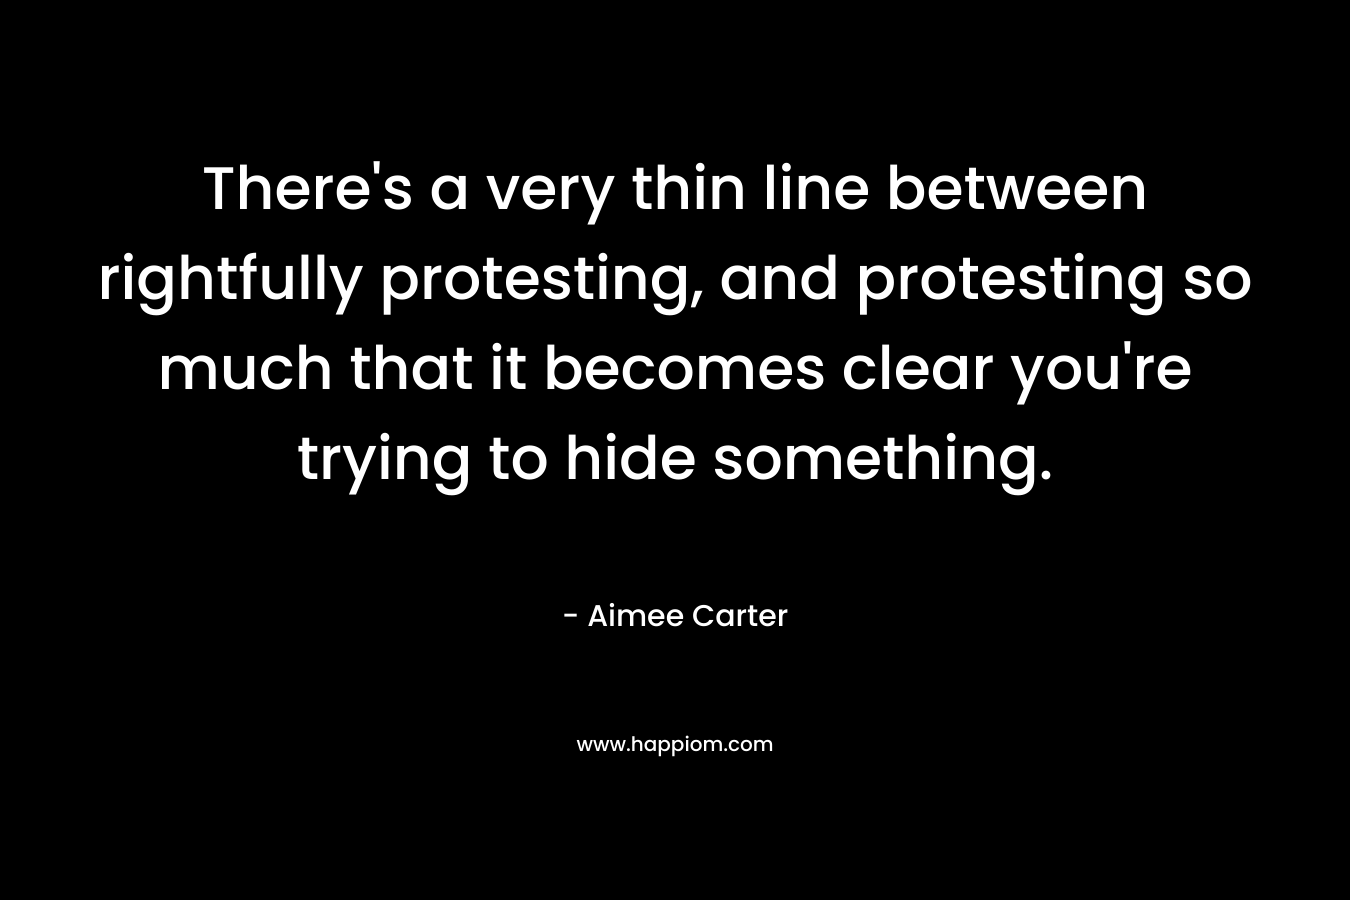 There’s a very thin line between rightfully protesting, and protesting so much that it becomes clear you’re trying to hide something. – Aimee Carter